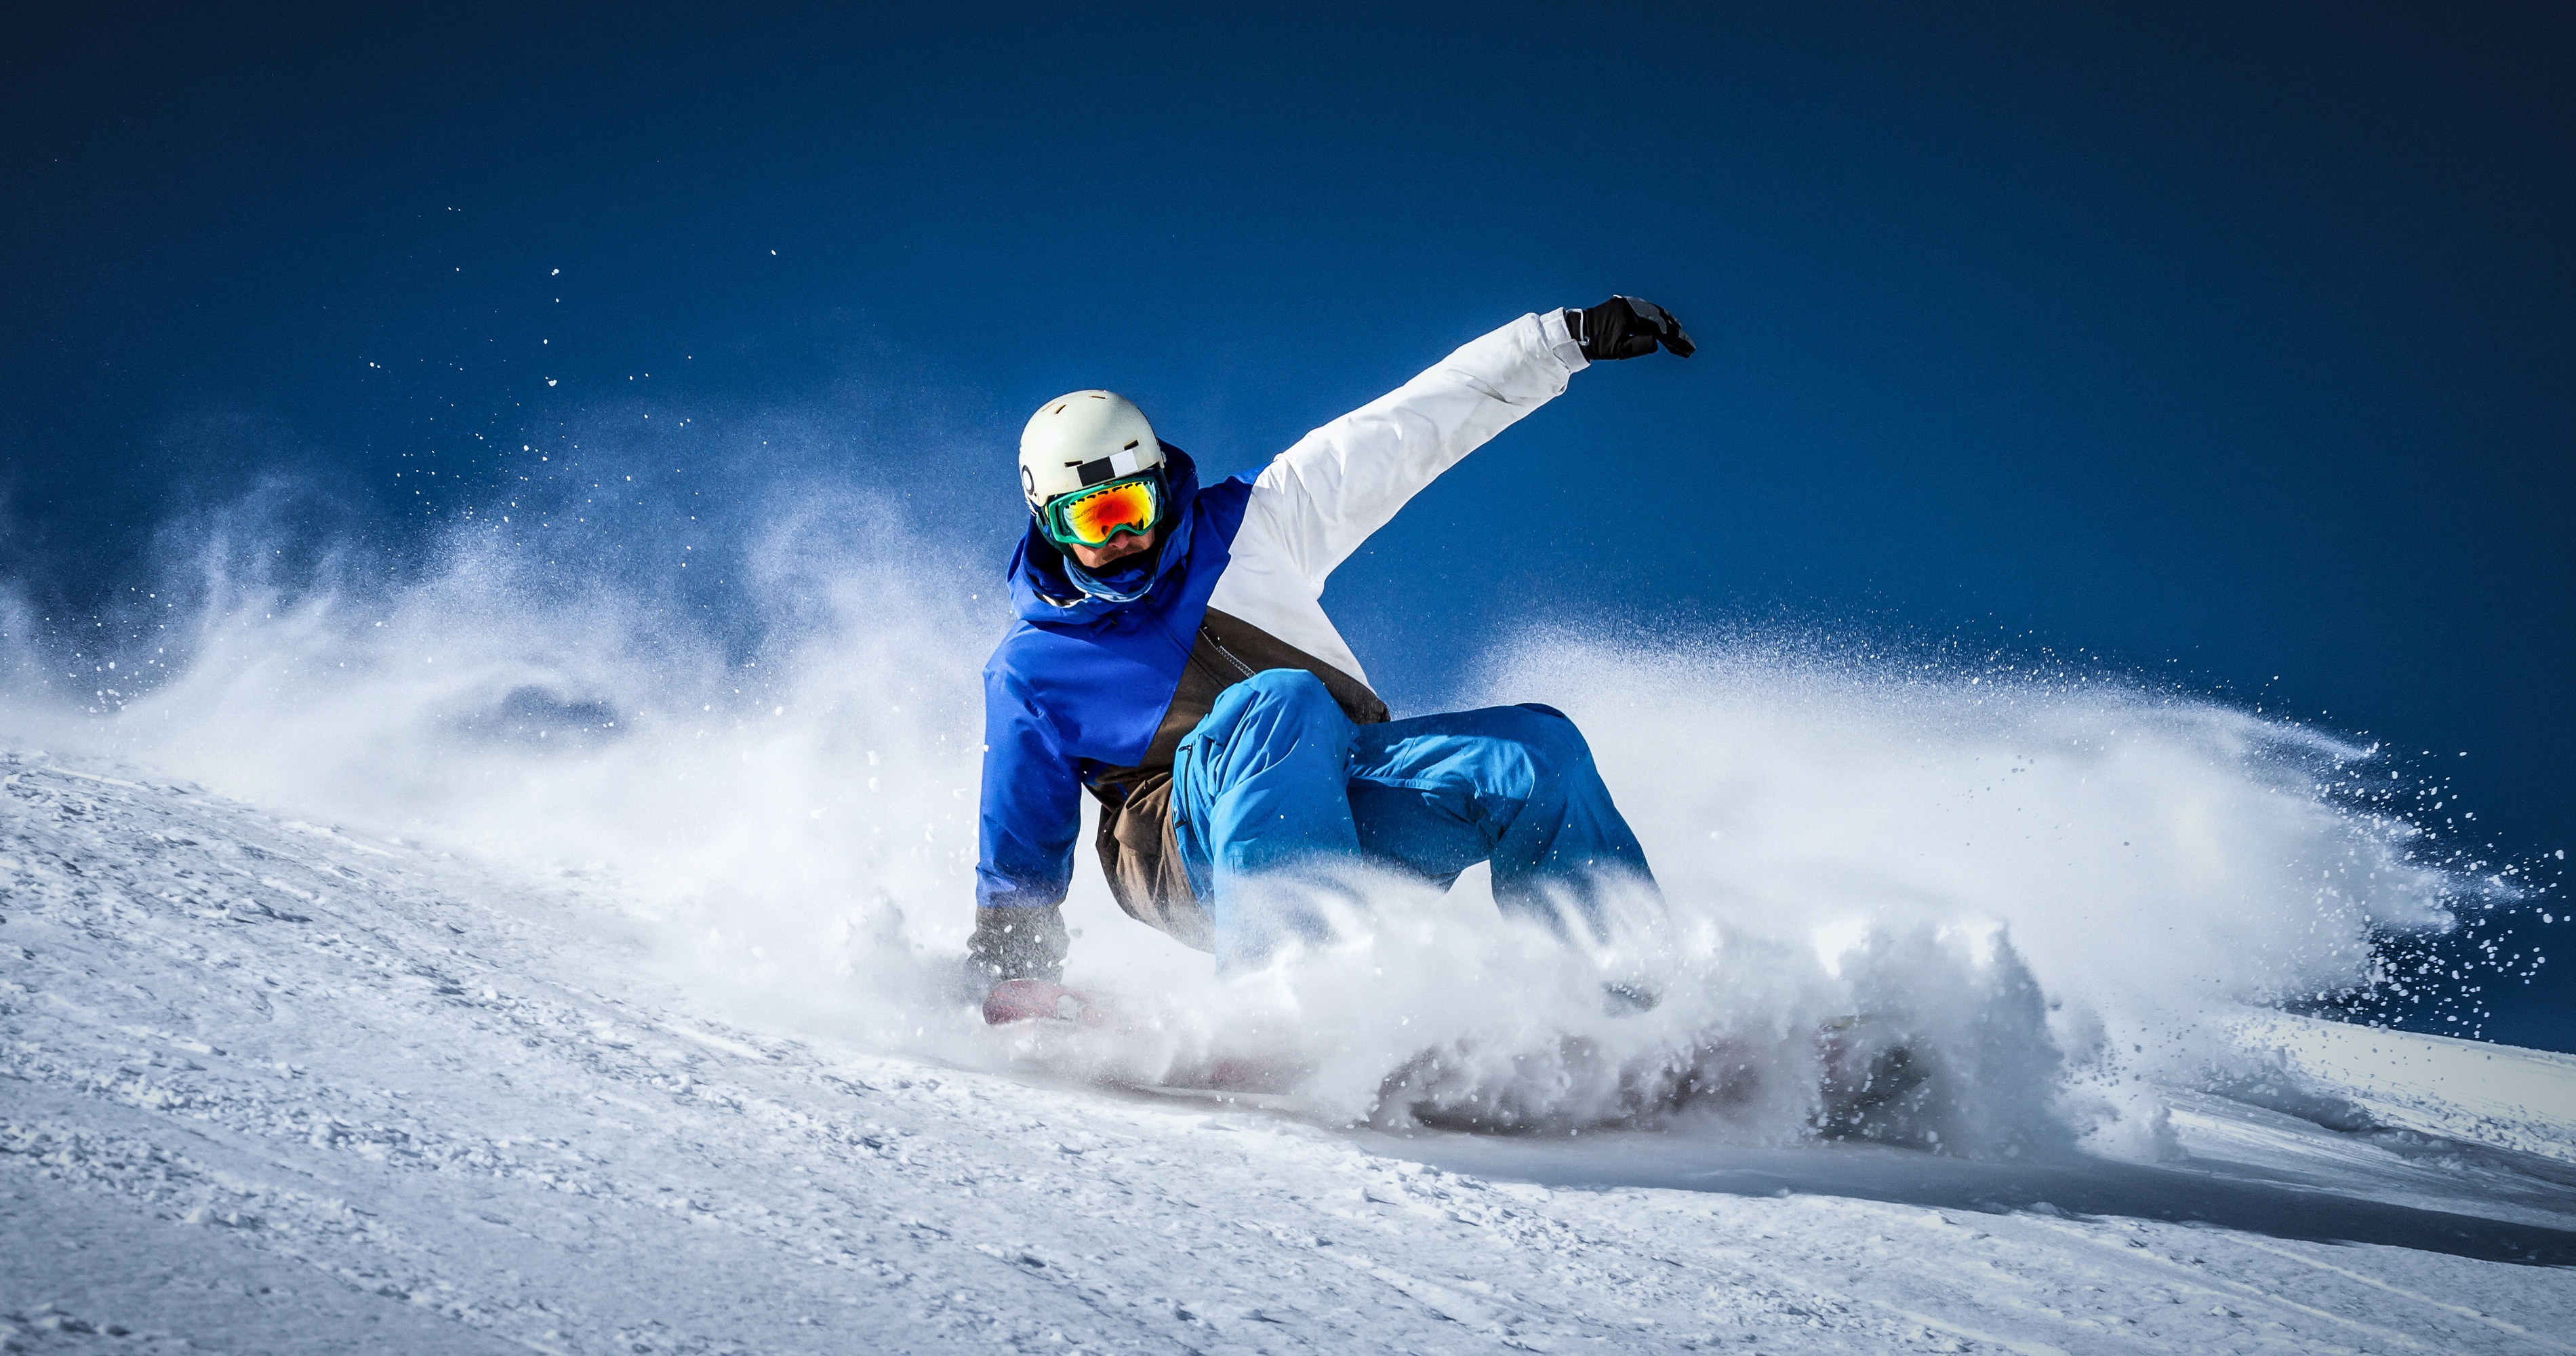 Snowboarding hd sports k wallpapers images backgrounds photos and pictures